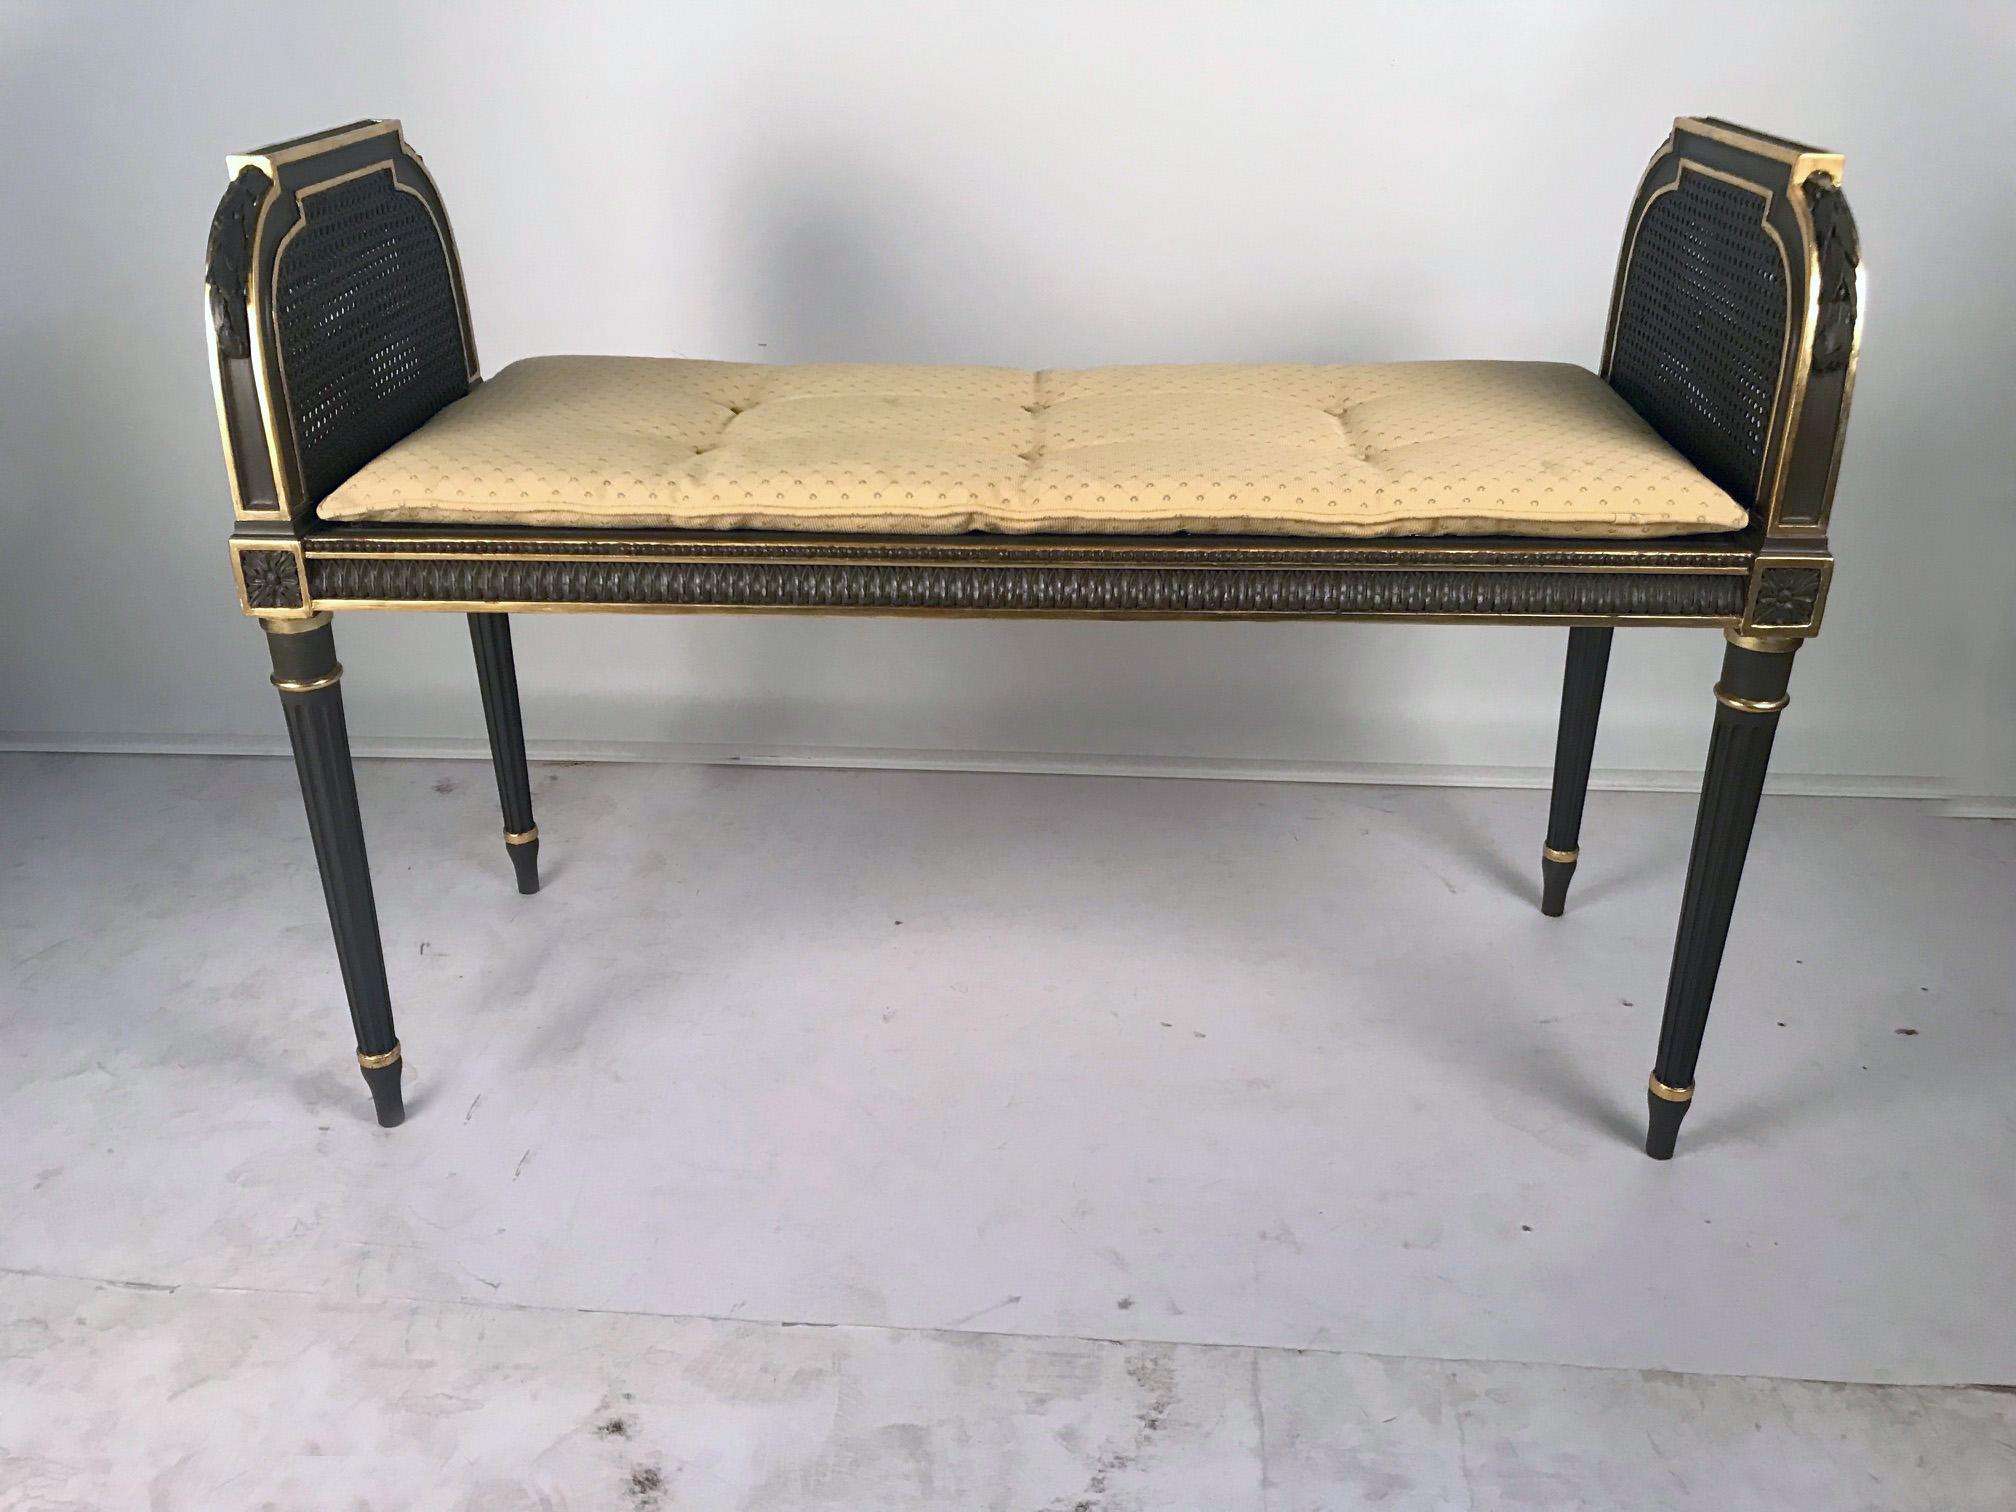 This elegant bench would be ideal as a window seat, at the foot of a bed or at a dressing table or even a piano. The ends are double-caned with the caning in original condition and applied with acanthus swags. It is raised on turned fluted tapering